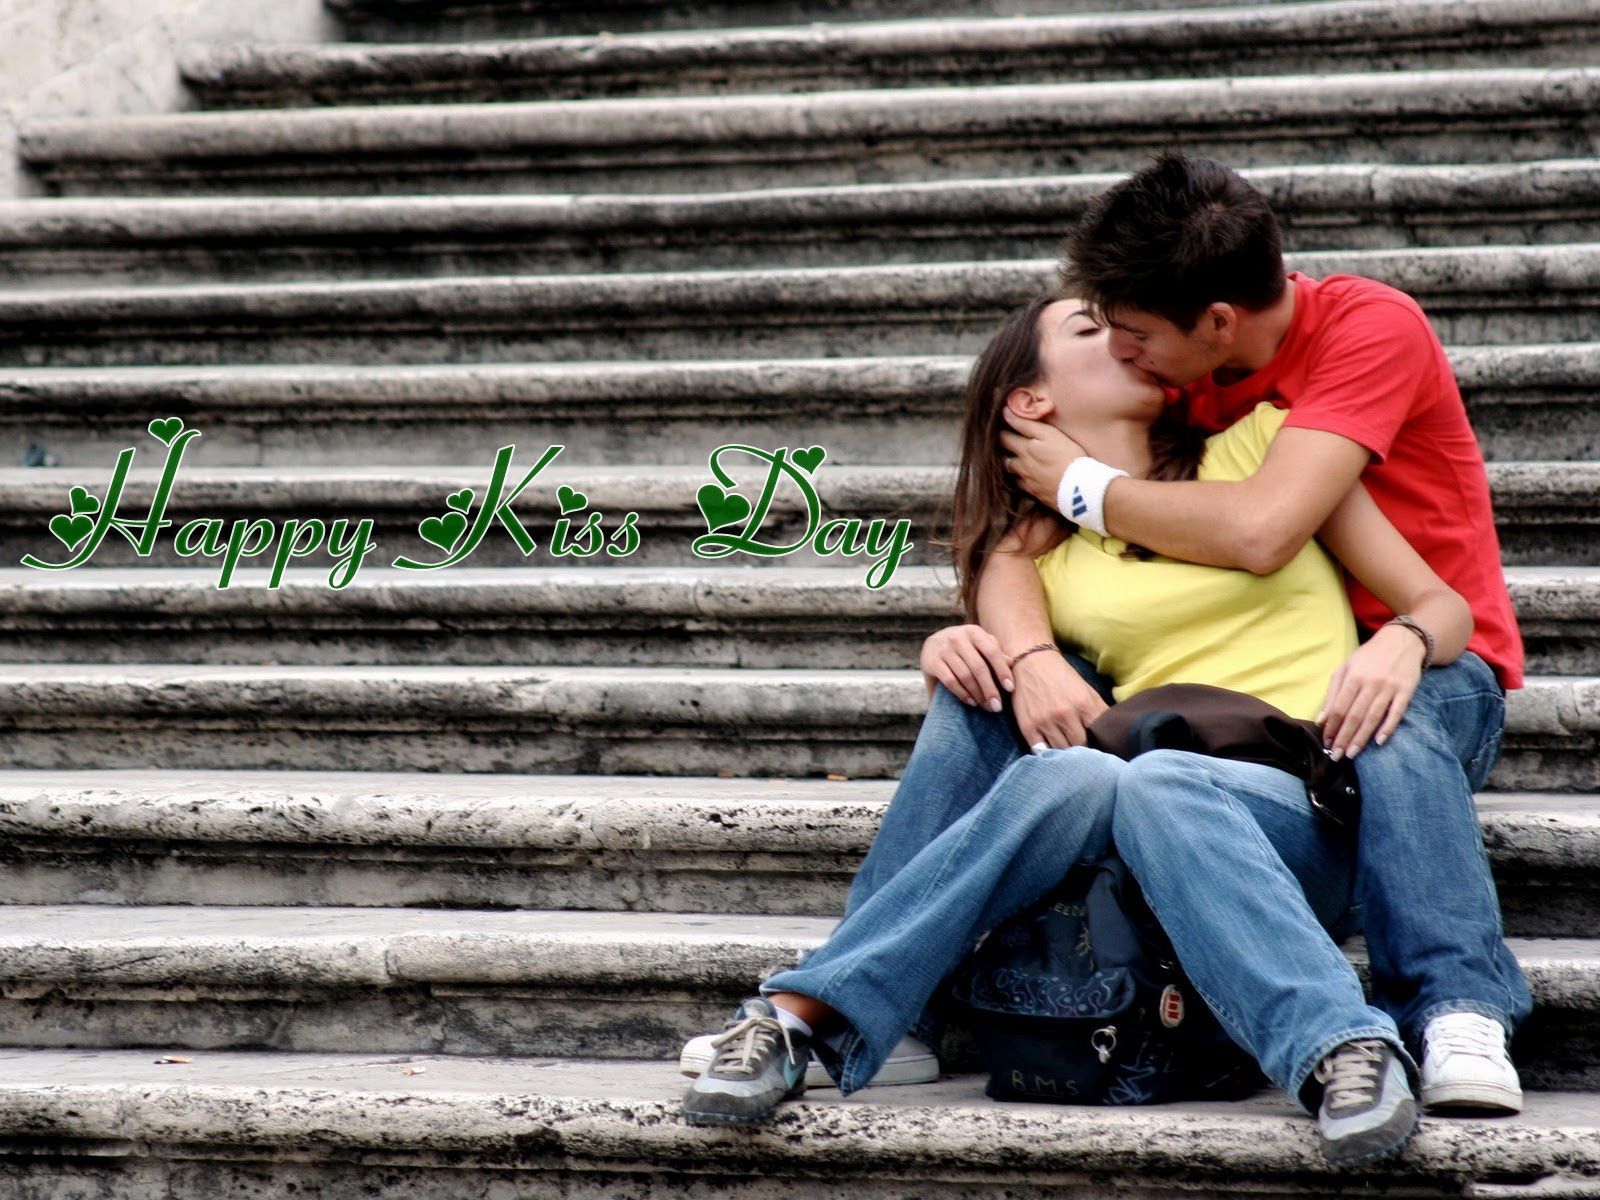 Happy Kiss Day 2021 Quotes Wishes .dekhnews.com